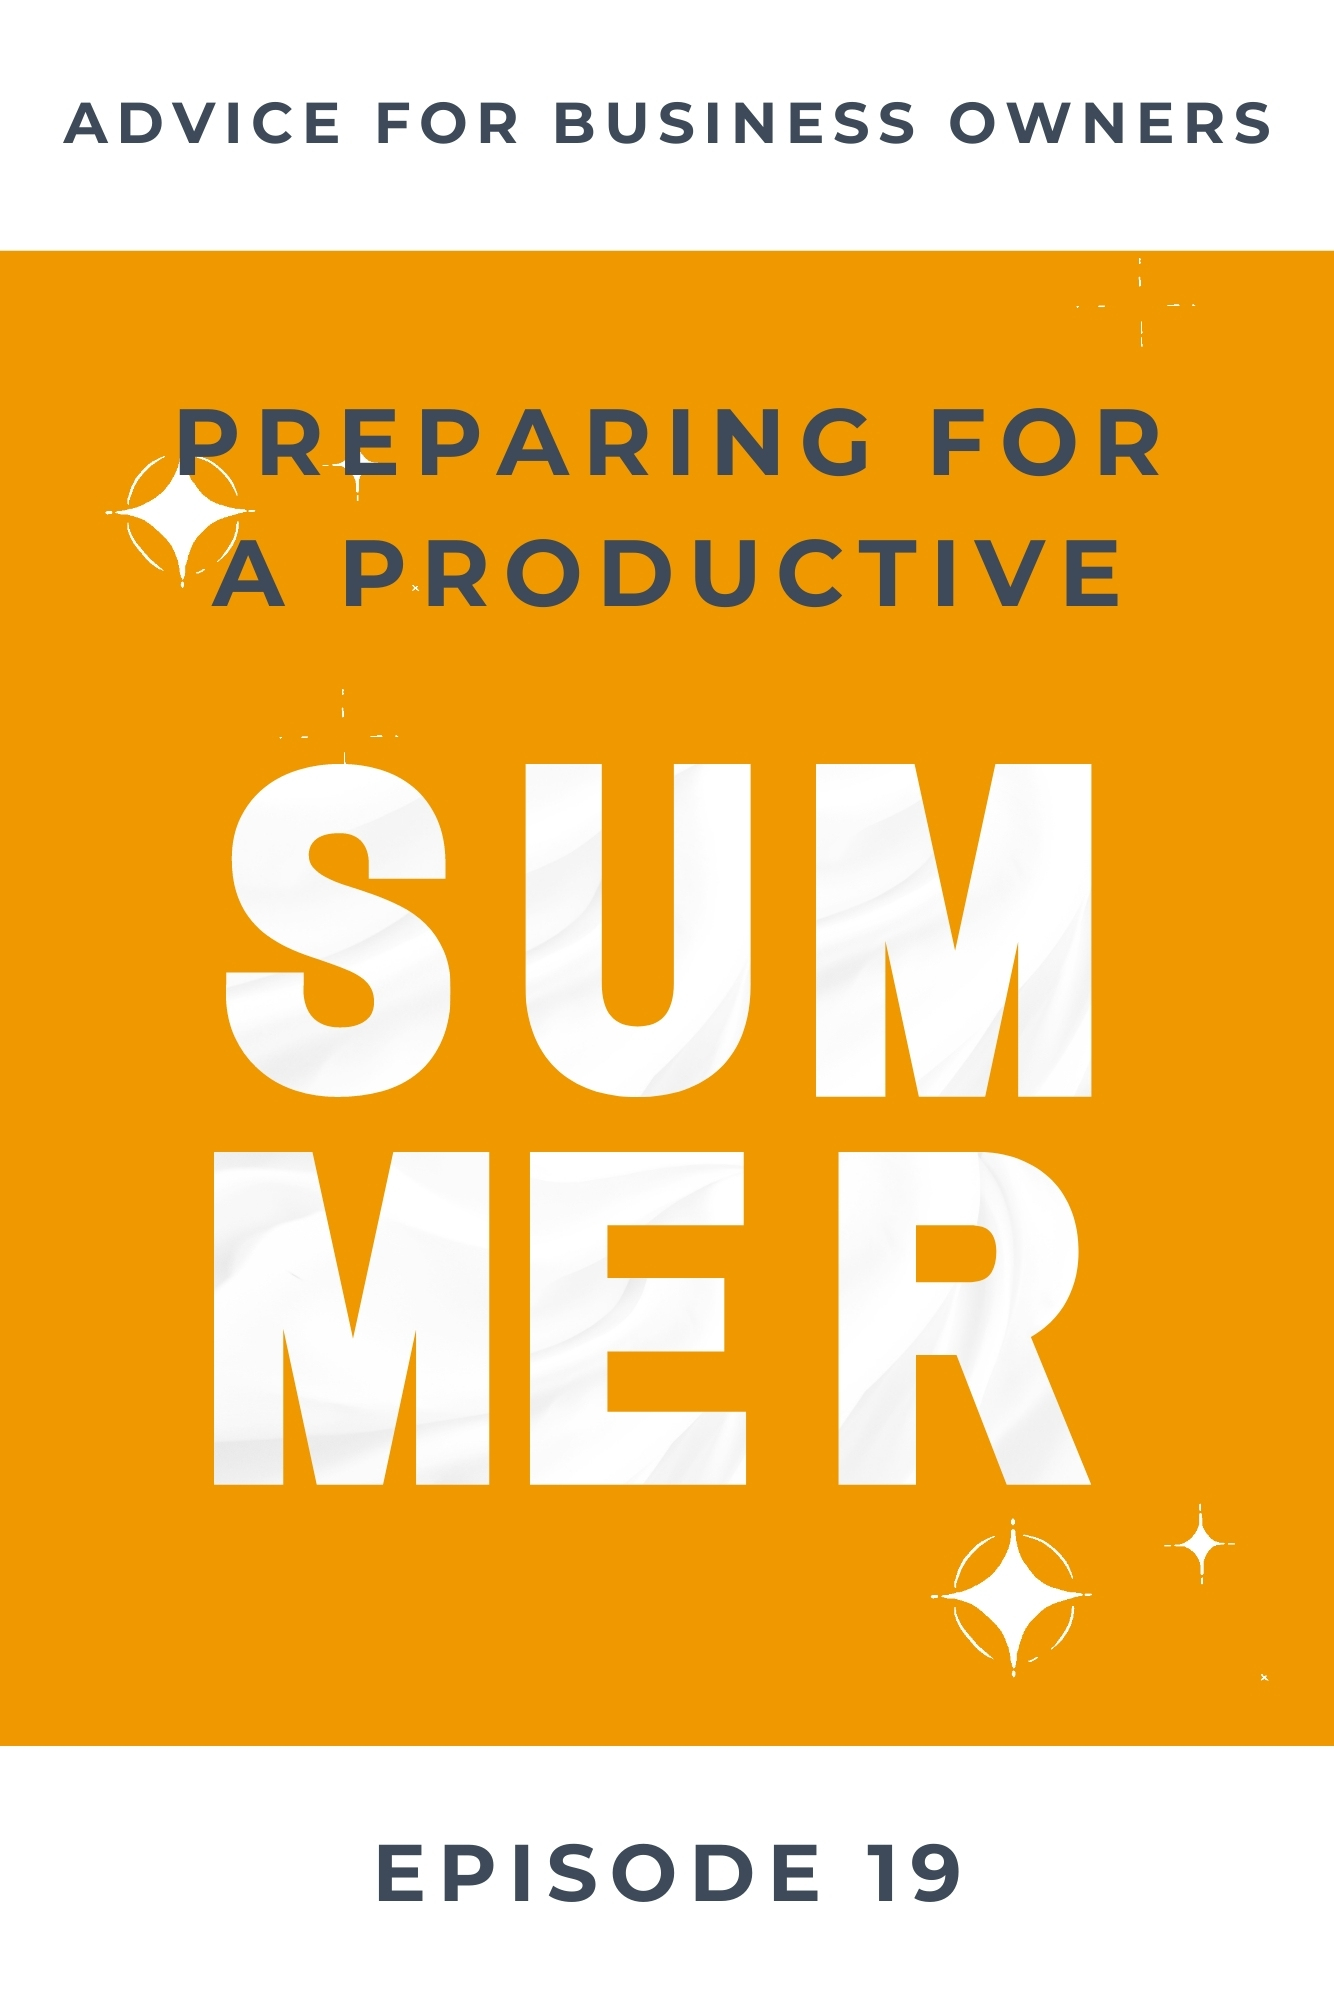 A Yellow graphic with white stars and what words that say Preparing for a productive summer. A graphic for a Christian women's business podcast and online businesses.